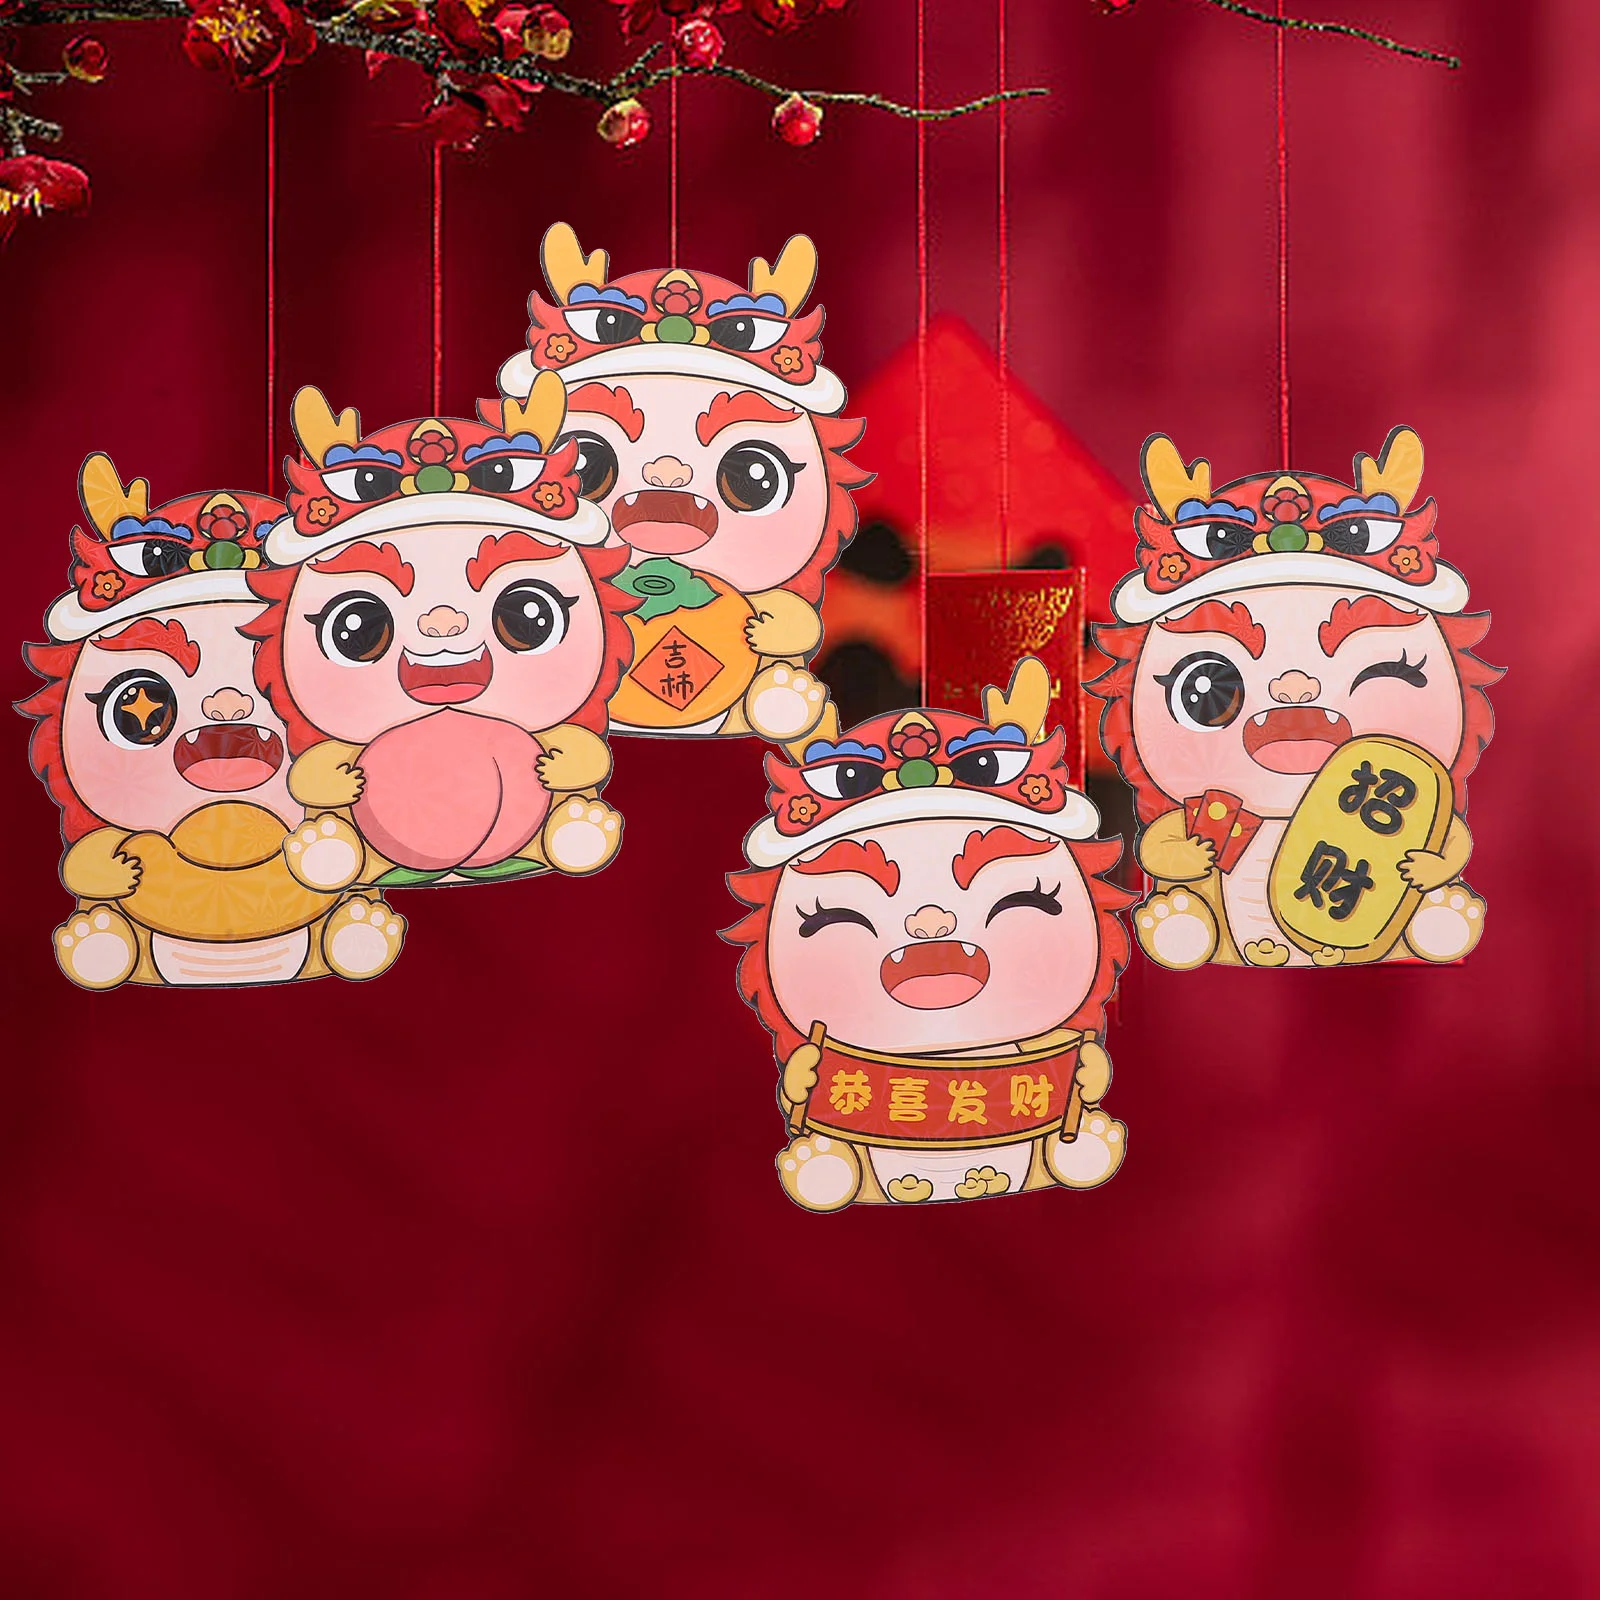 

30 Pcs Chinese Red Envelope Luck Money Bag Envelopes Lunar Year Packet Cute Dragon Packets Three-dimensional New